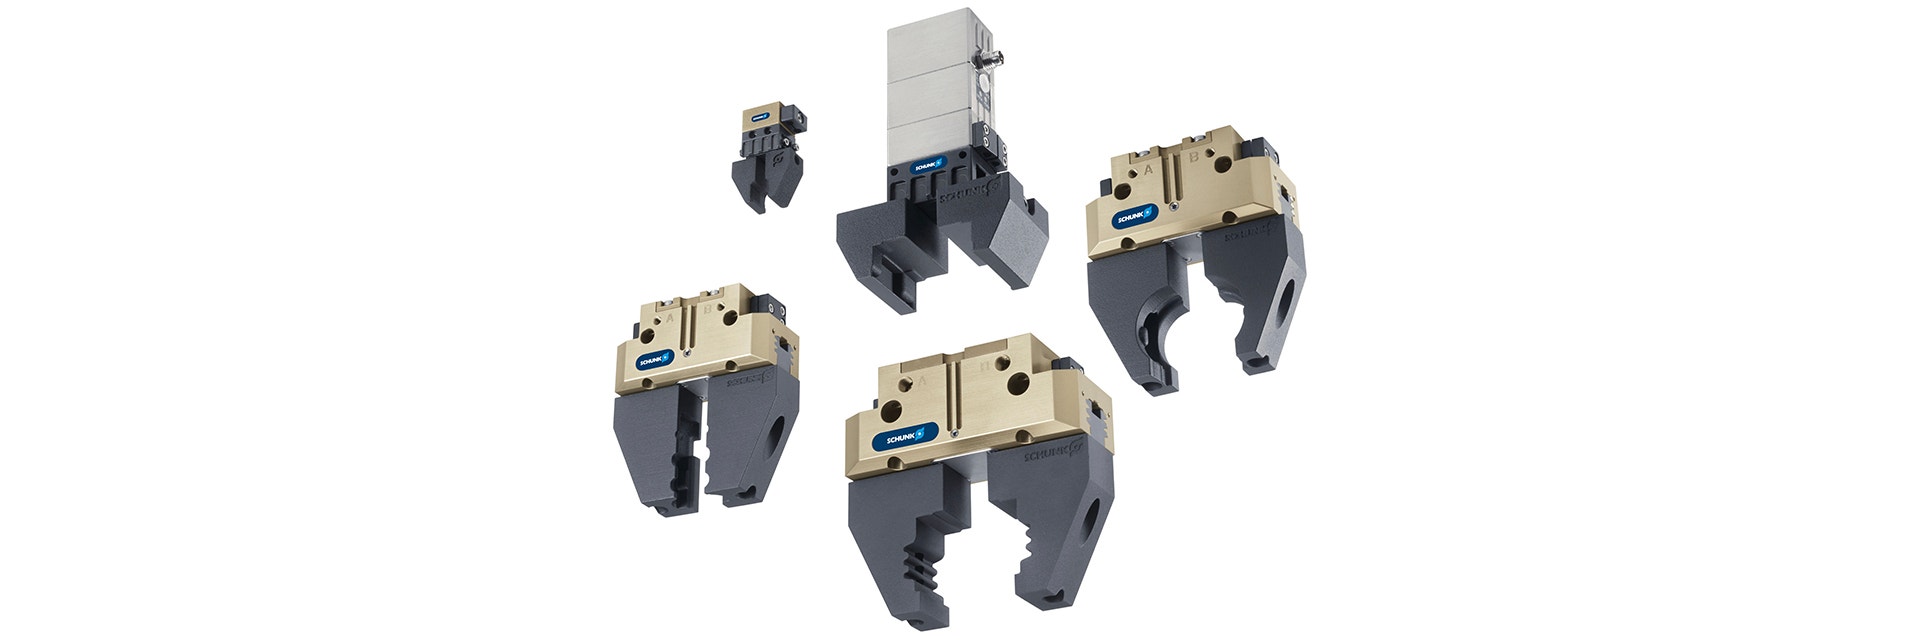 Various types of 3D-printed grippers from SCHUNK